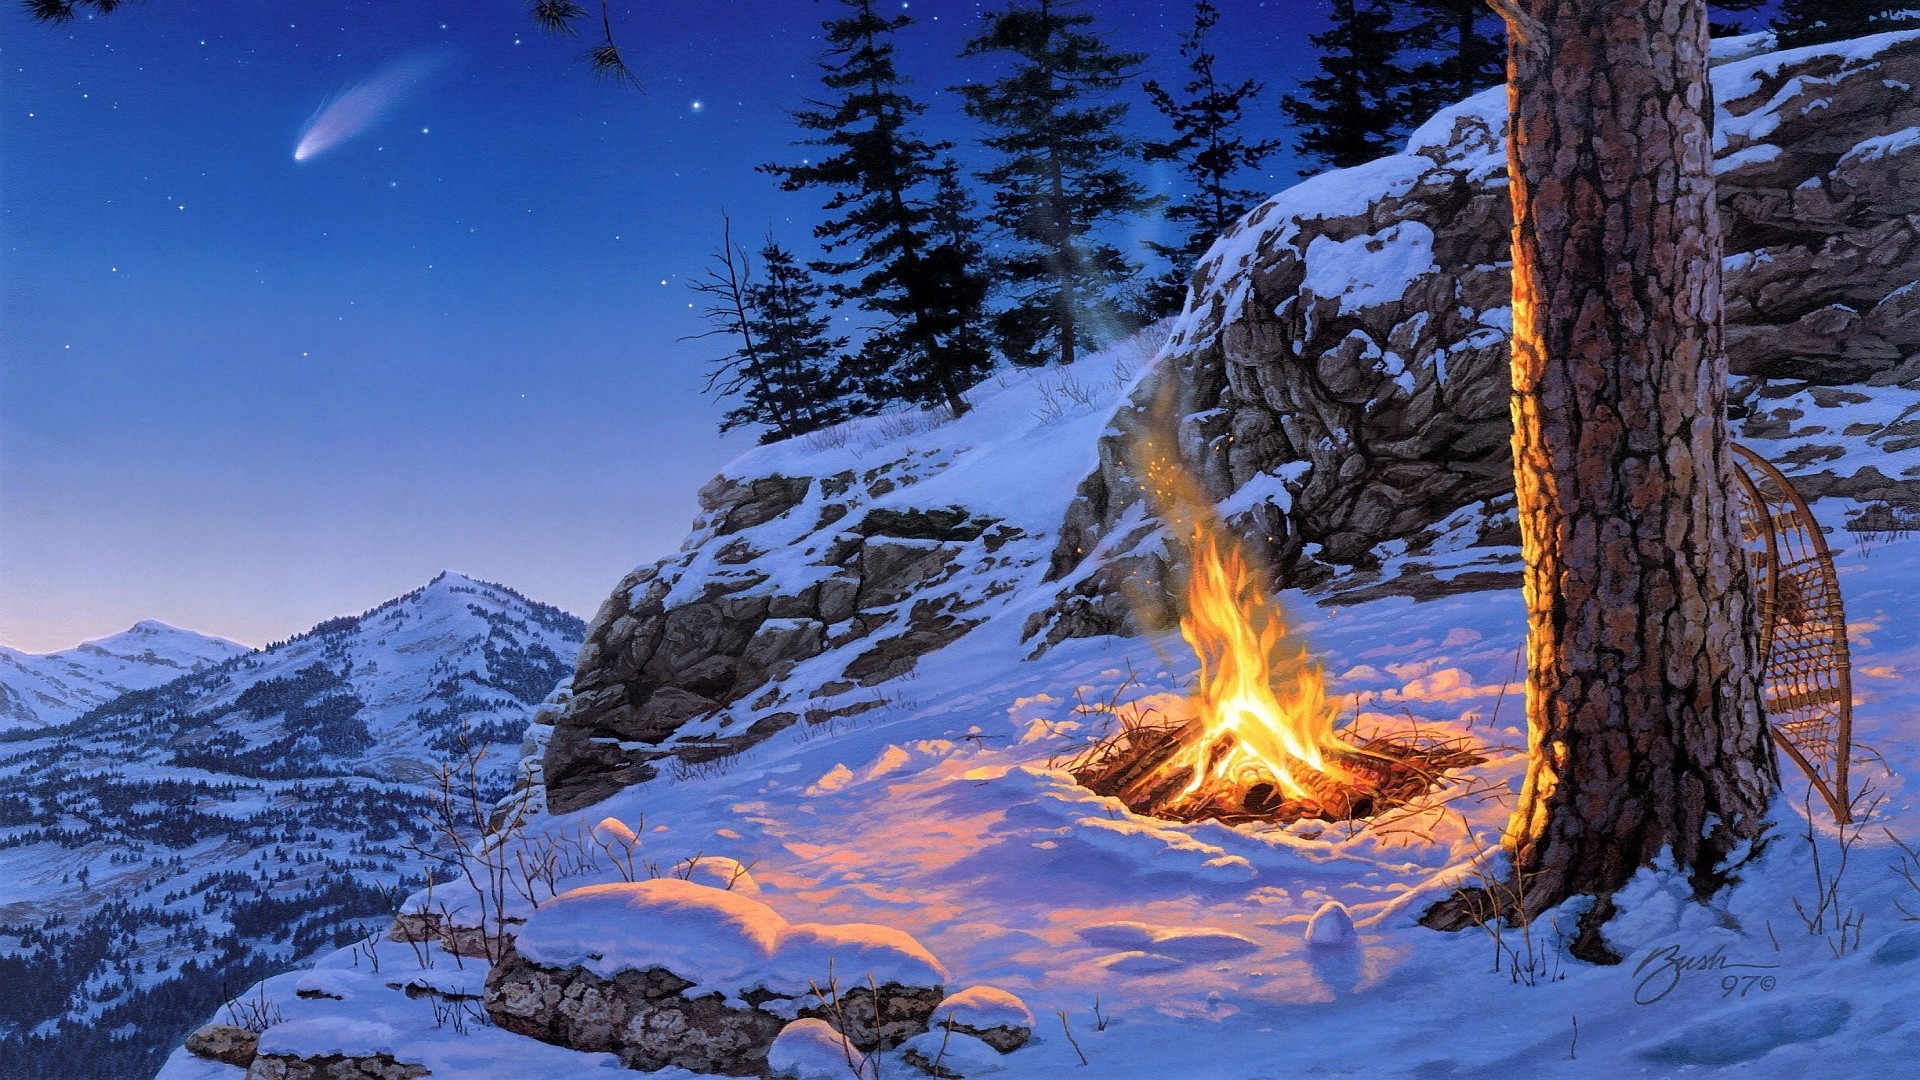 1920x1080 Fire on the snowy mountain wallpaper